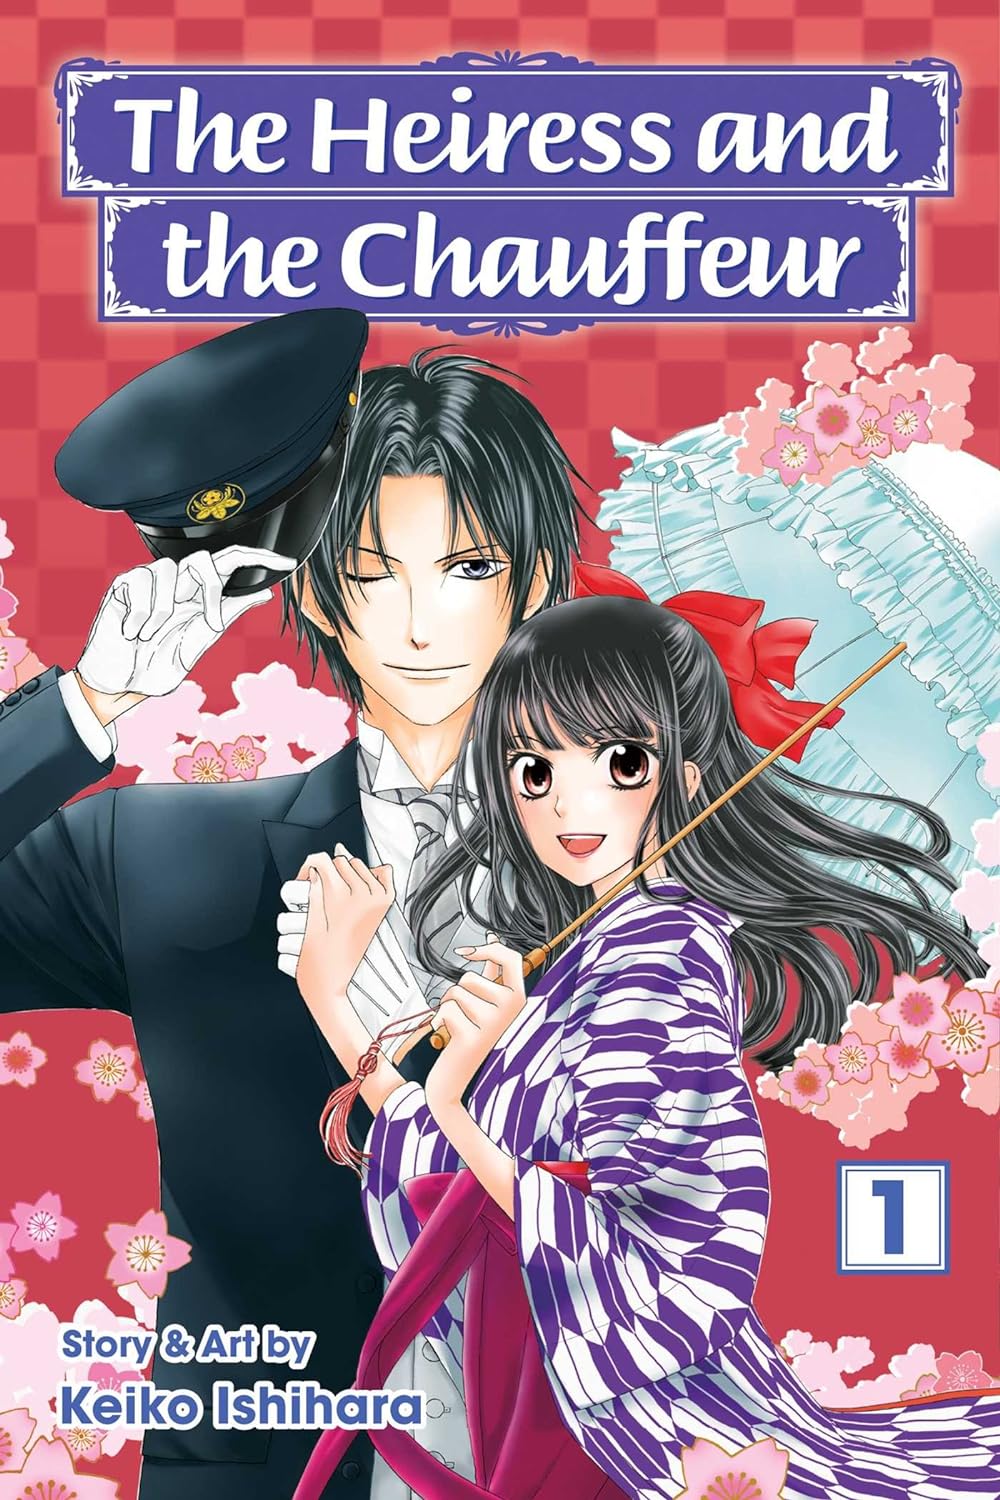 The Heiress and the Chauffeur Vol. 01